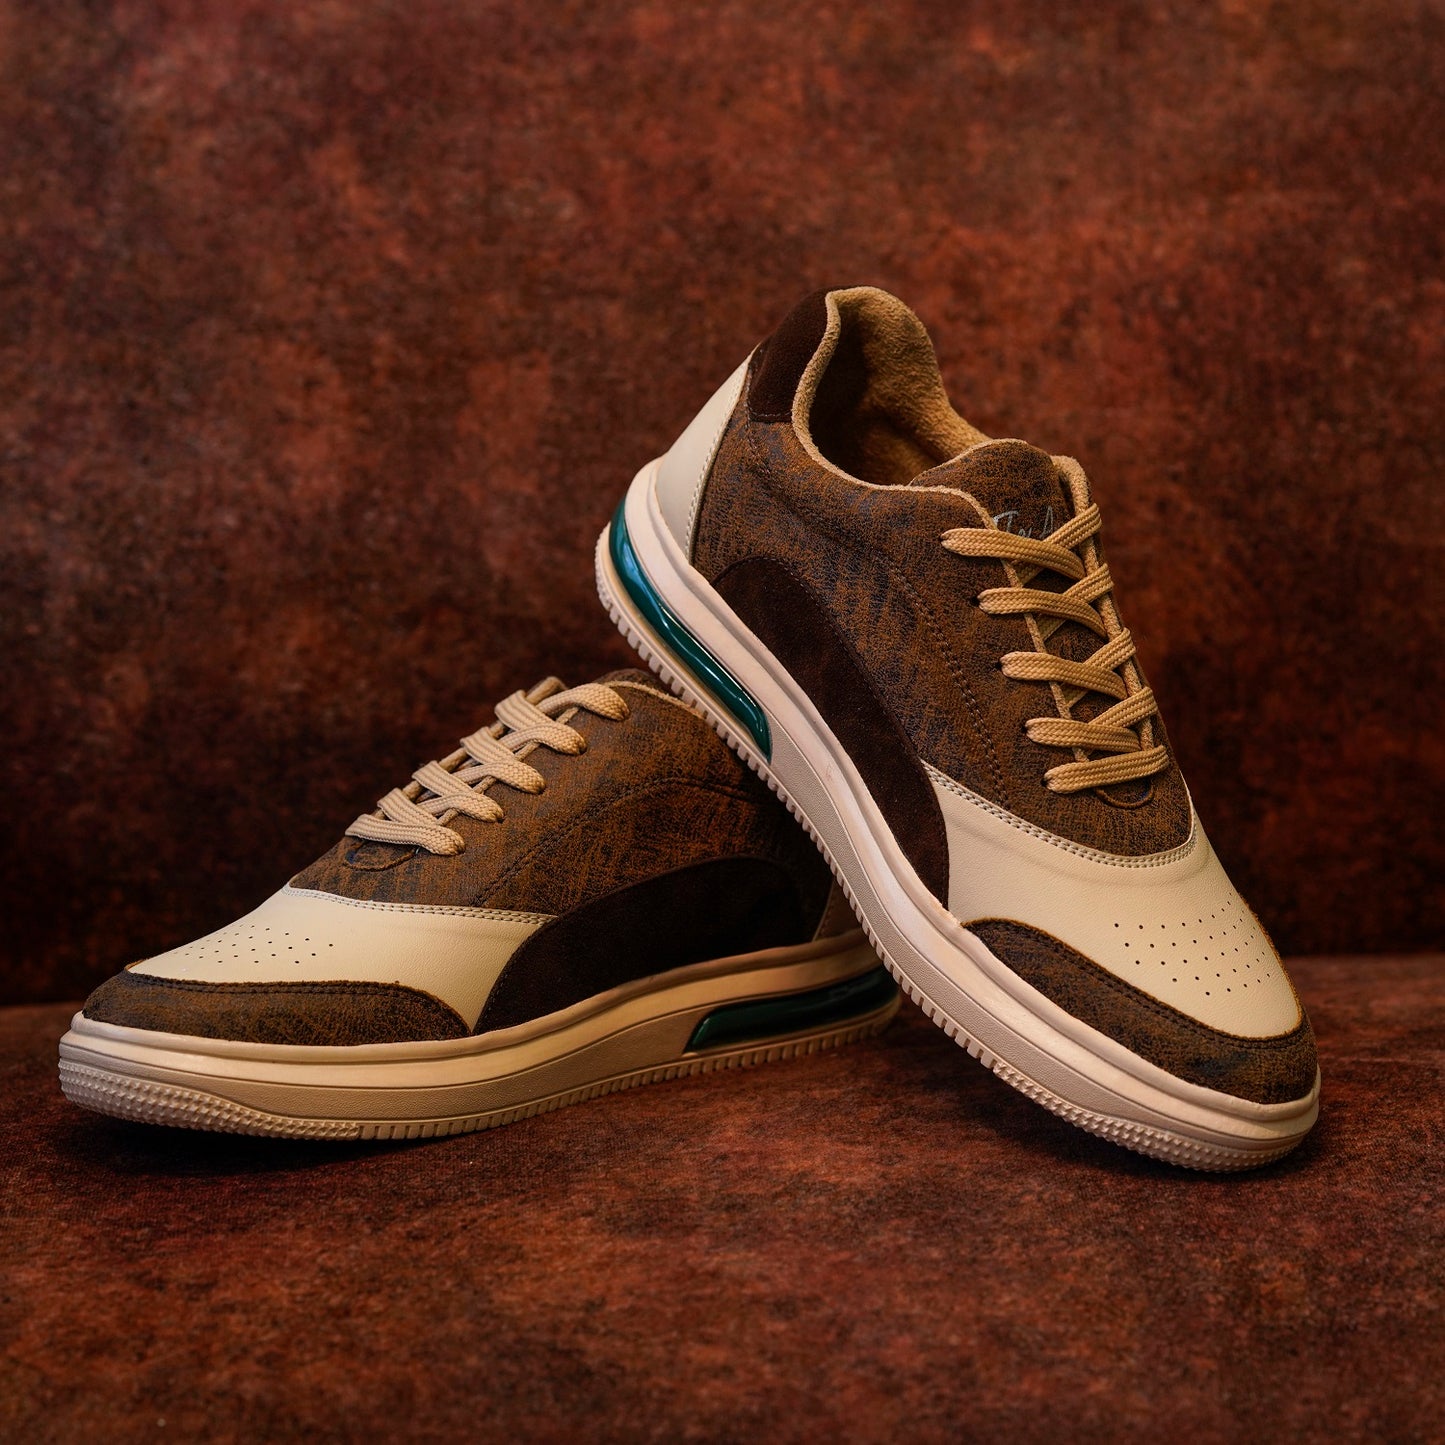 The Aurous Typhoon Laceup Sneakers - Brown